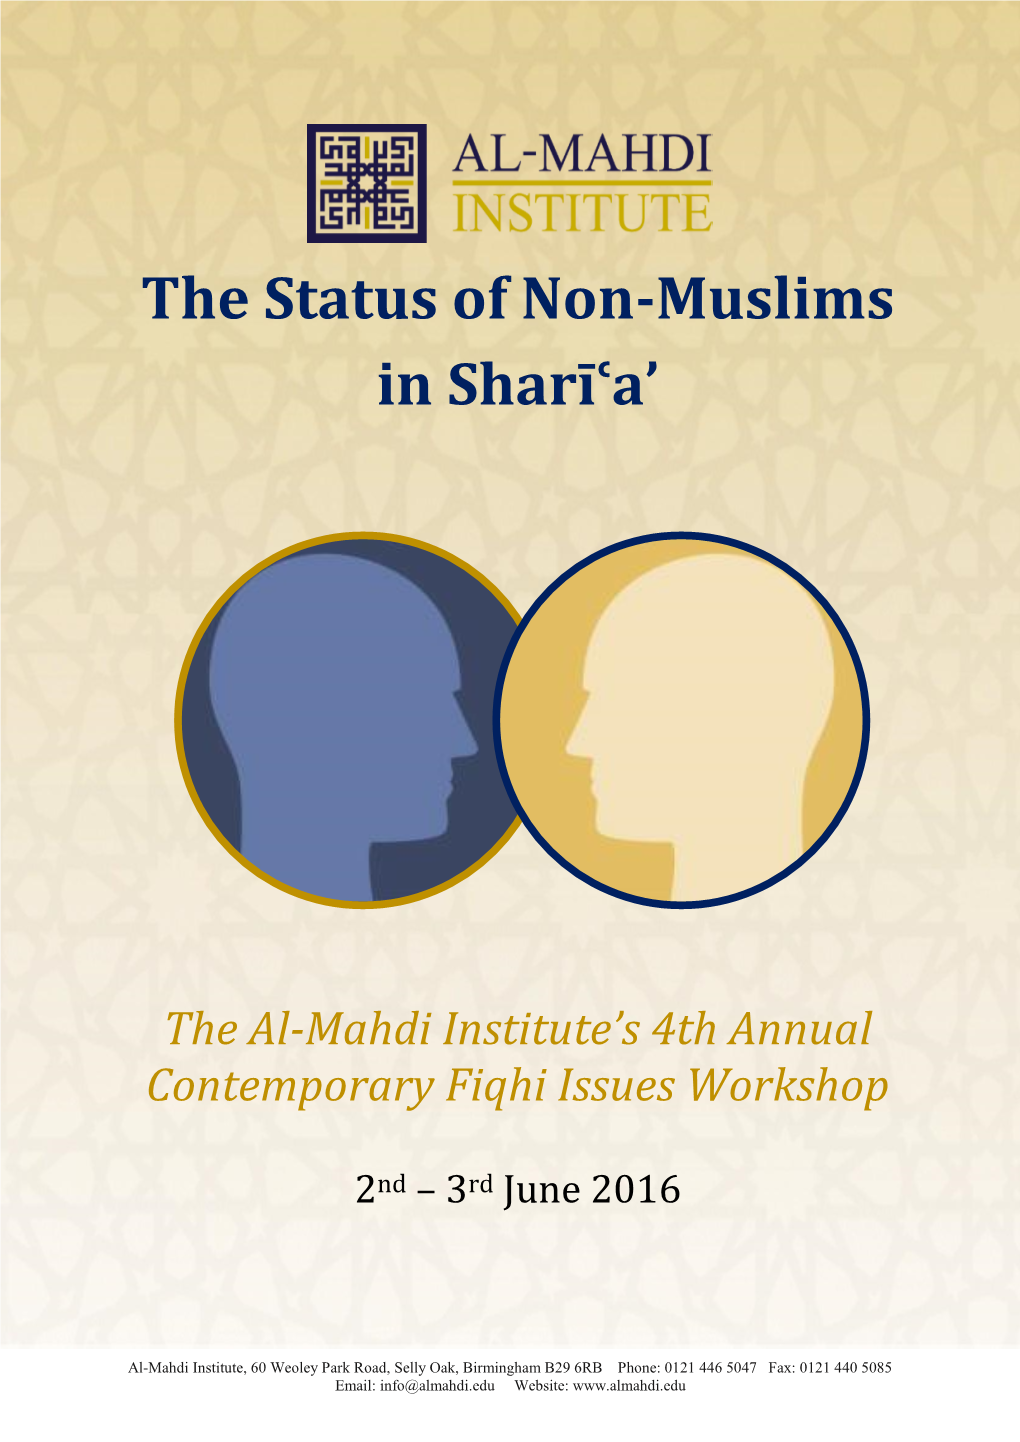 The Status of Non-Muslims in Sharīʿa'